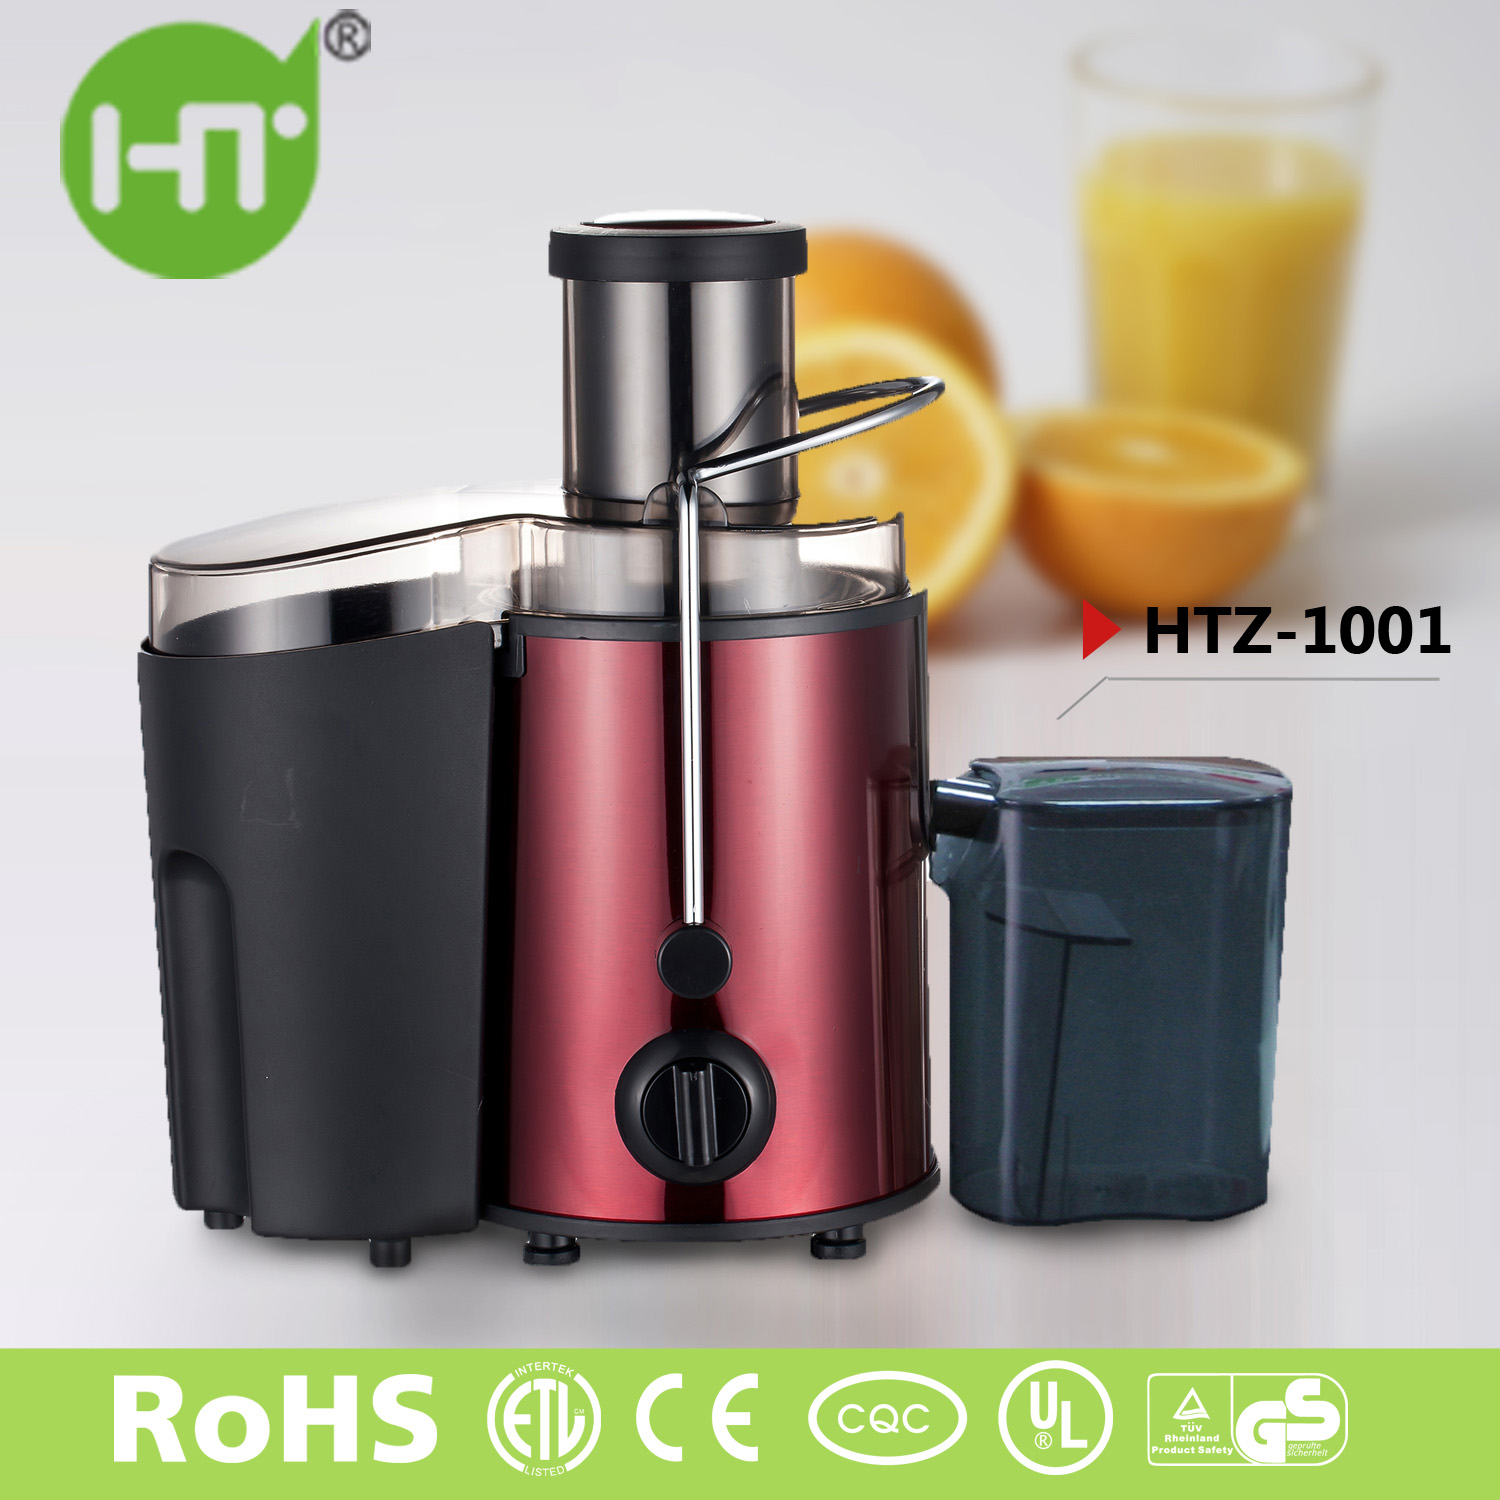 HTZ-1001 2015 New Latest Low Power Consumption Stainless Steel High Efficiency Electric Juicer 